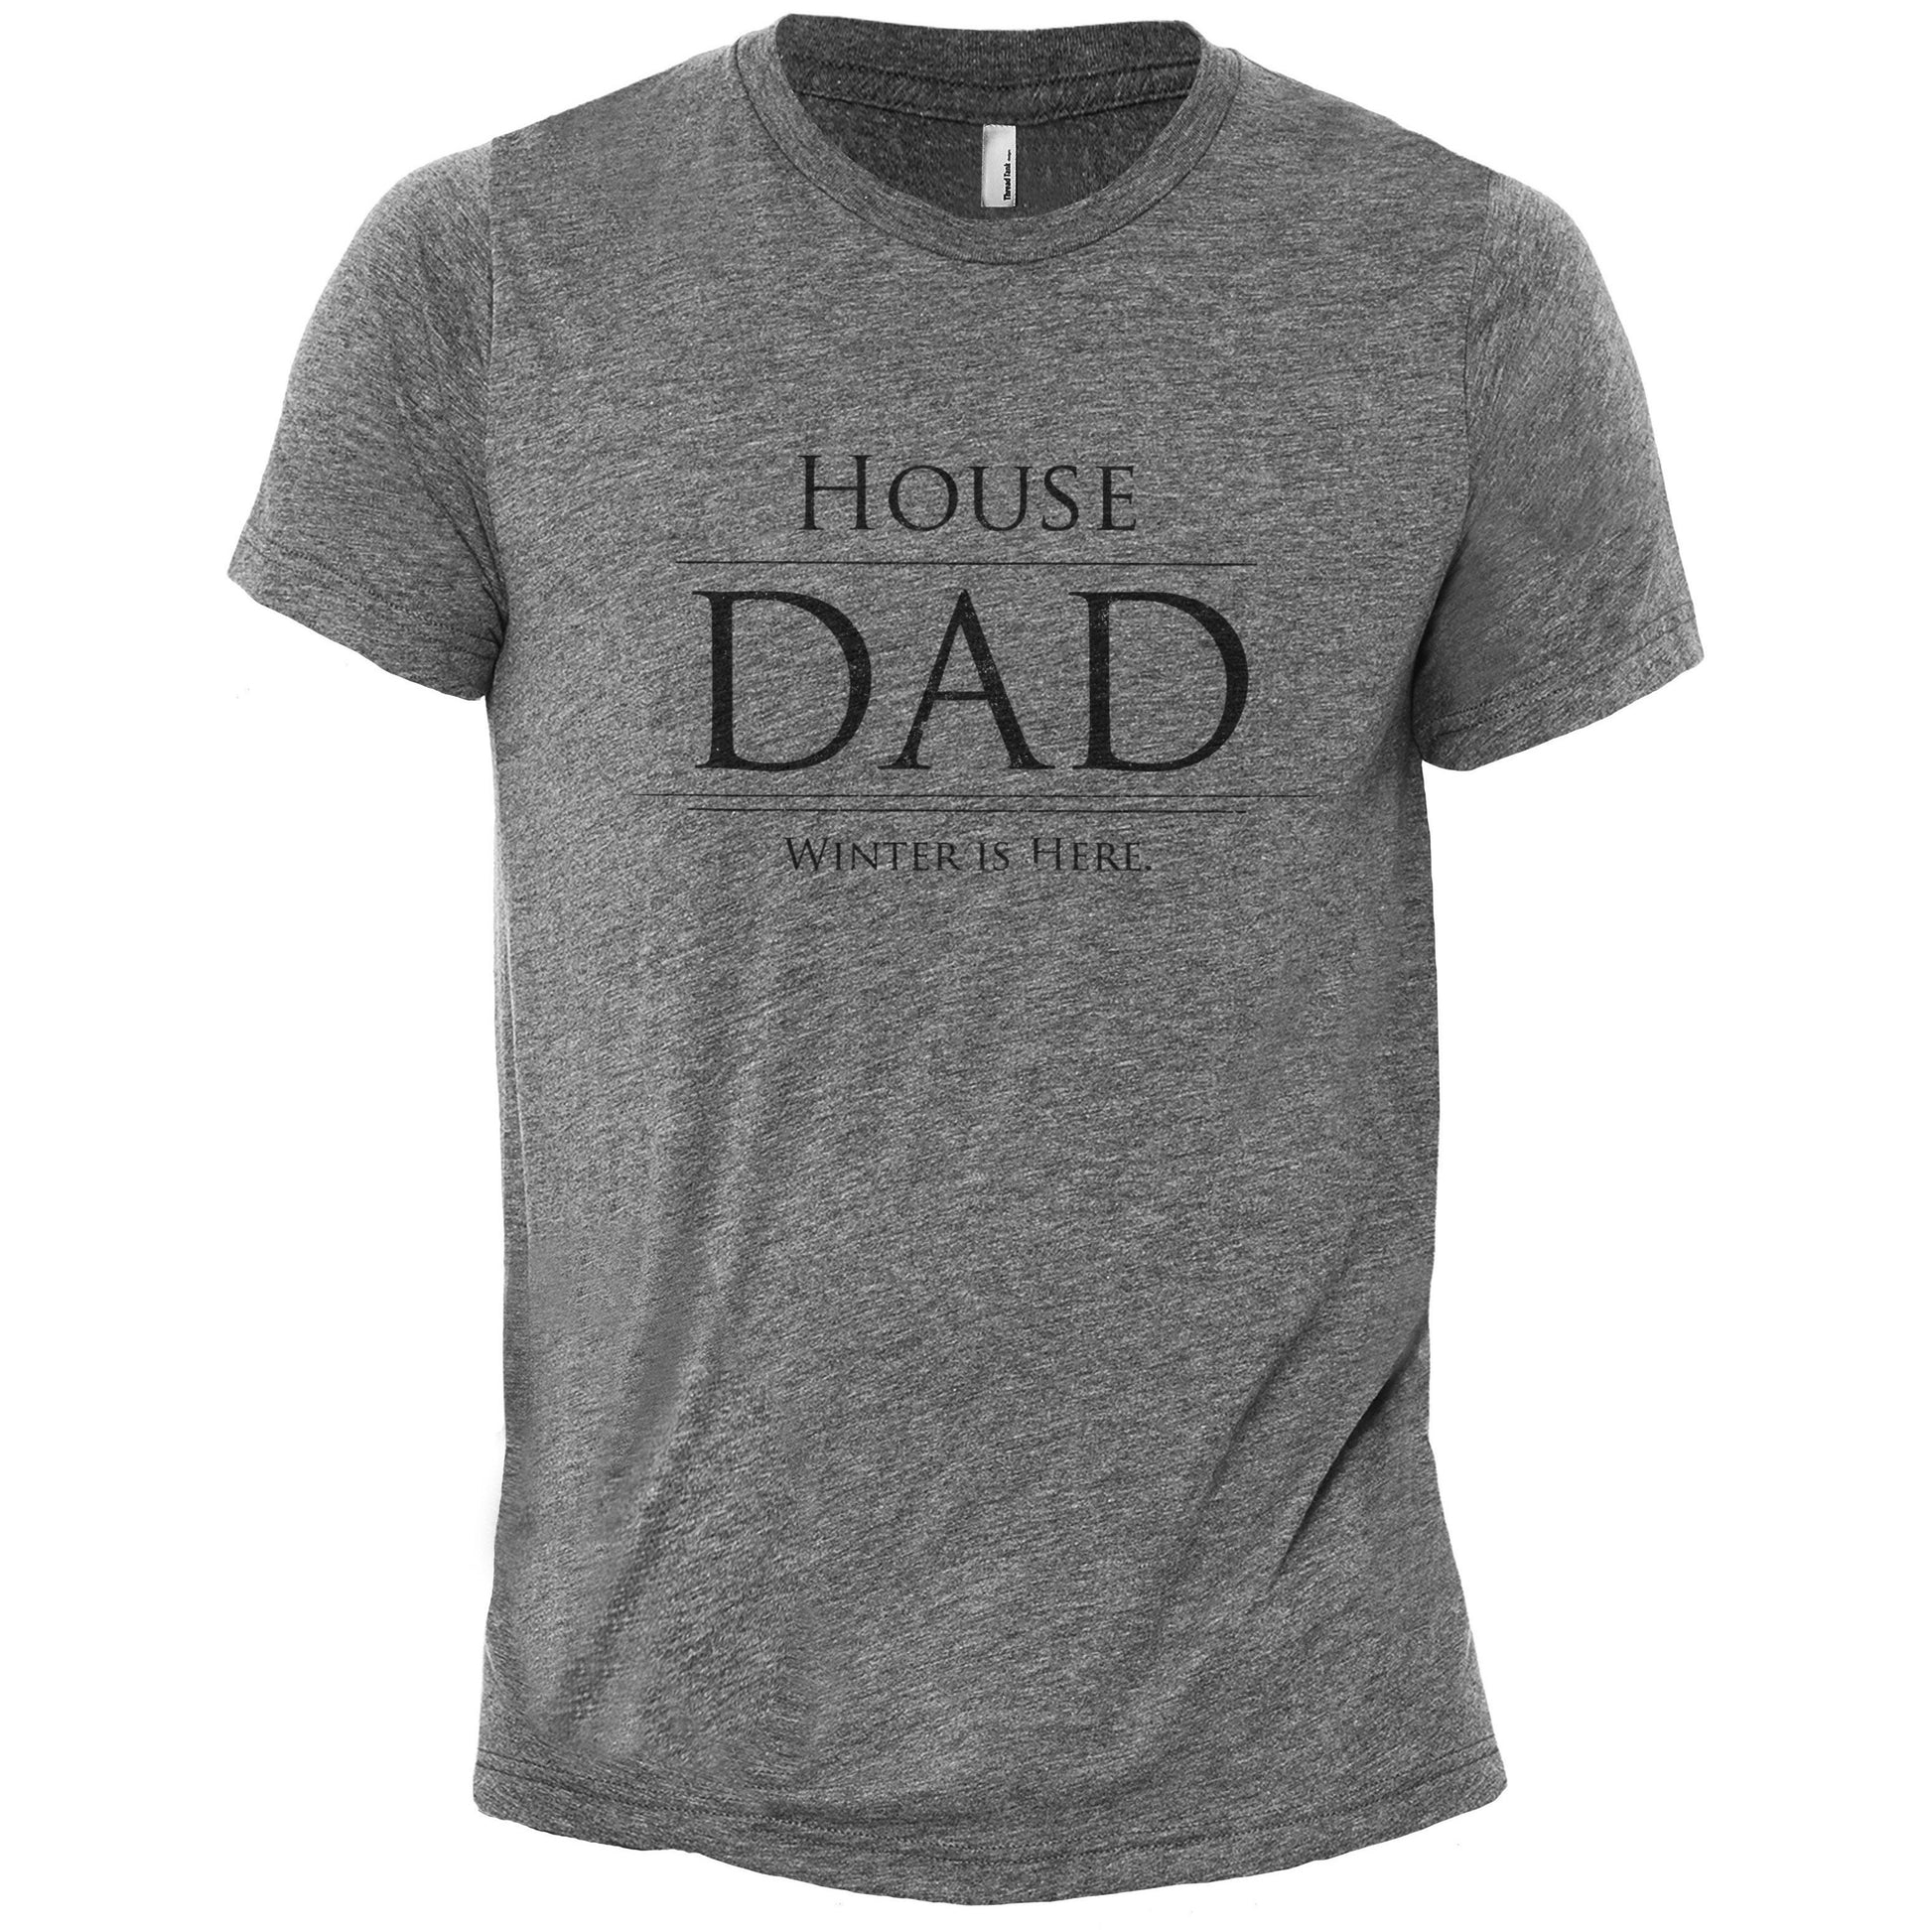 House Dad Winter Is Here Printed Graphic Men's Crew T-Shirt Tee